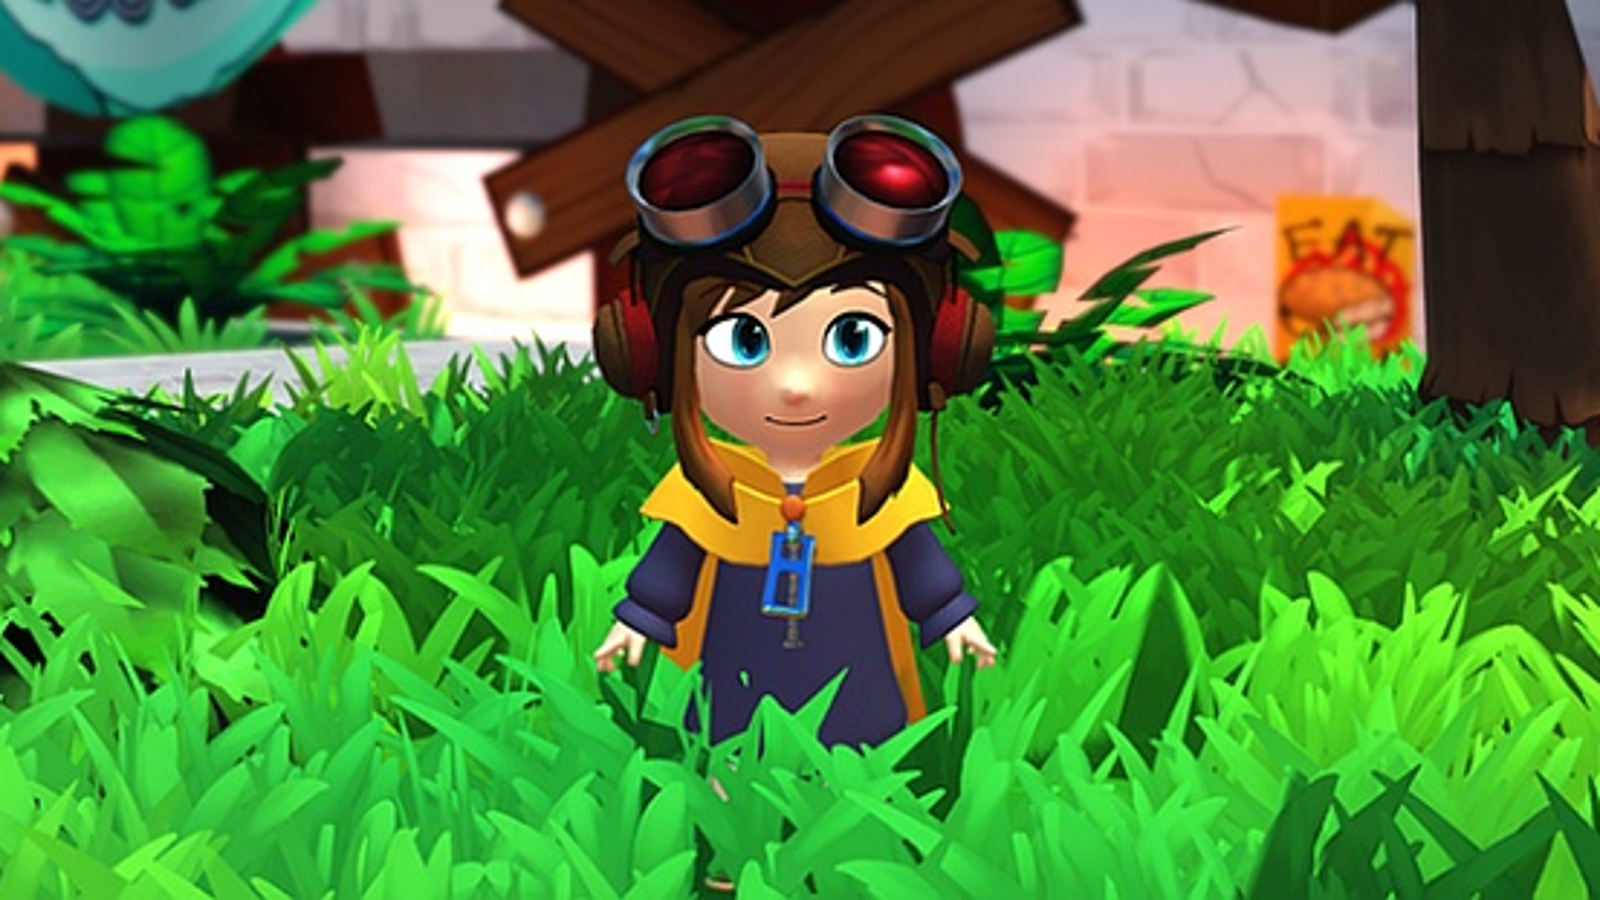 A Hat in Time review